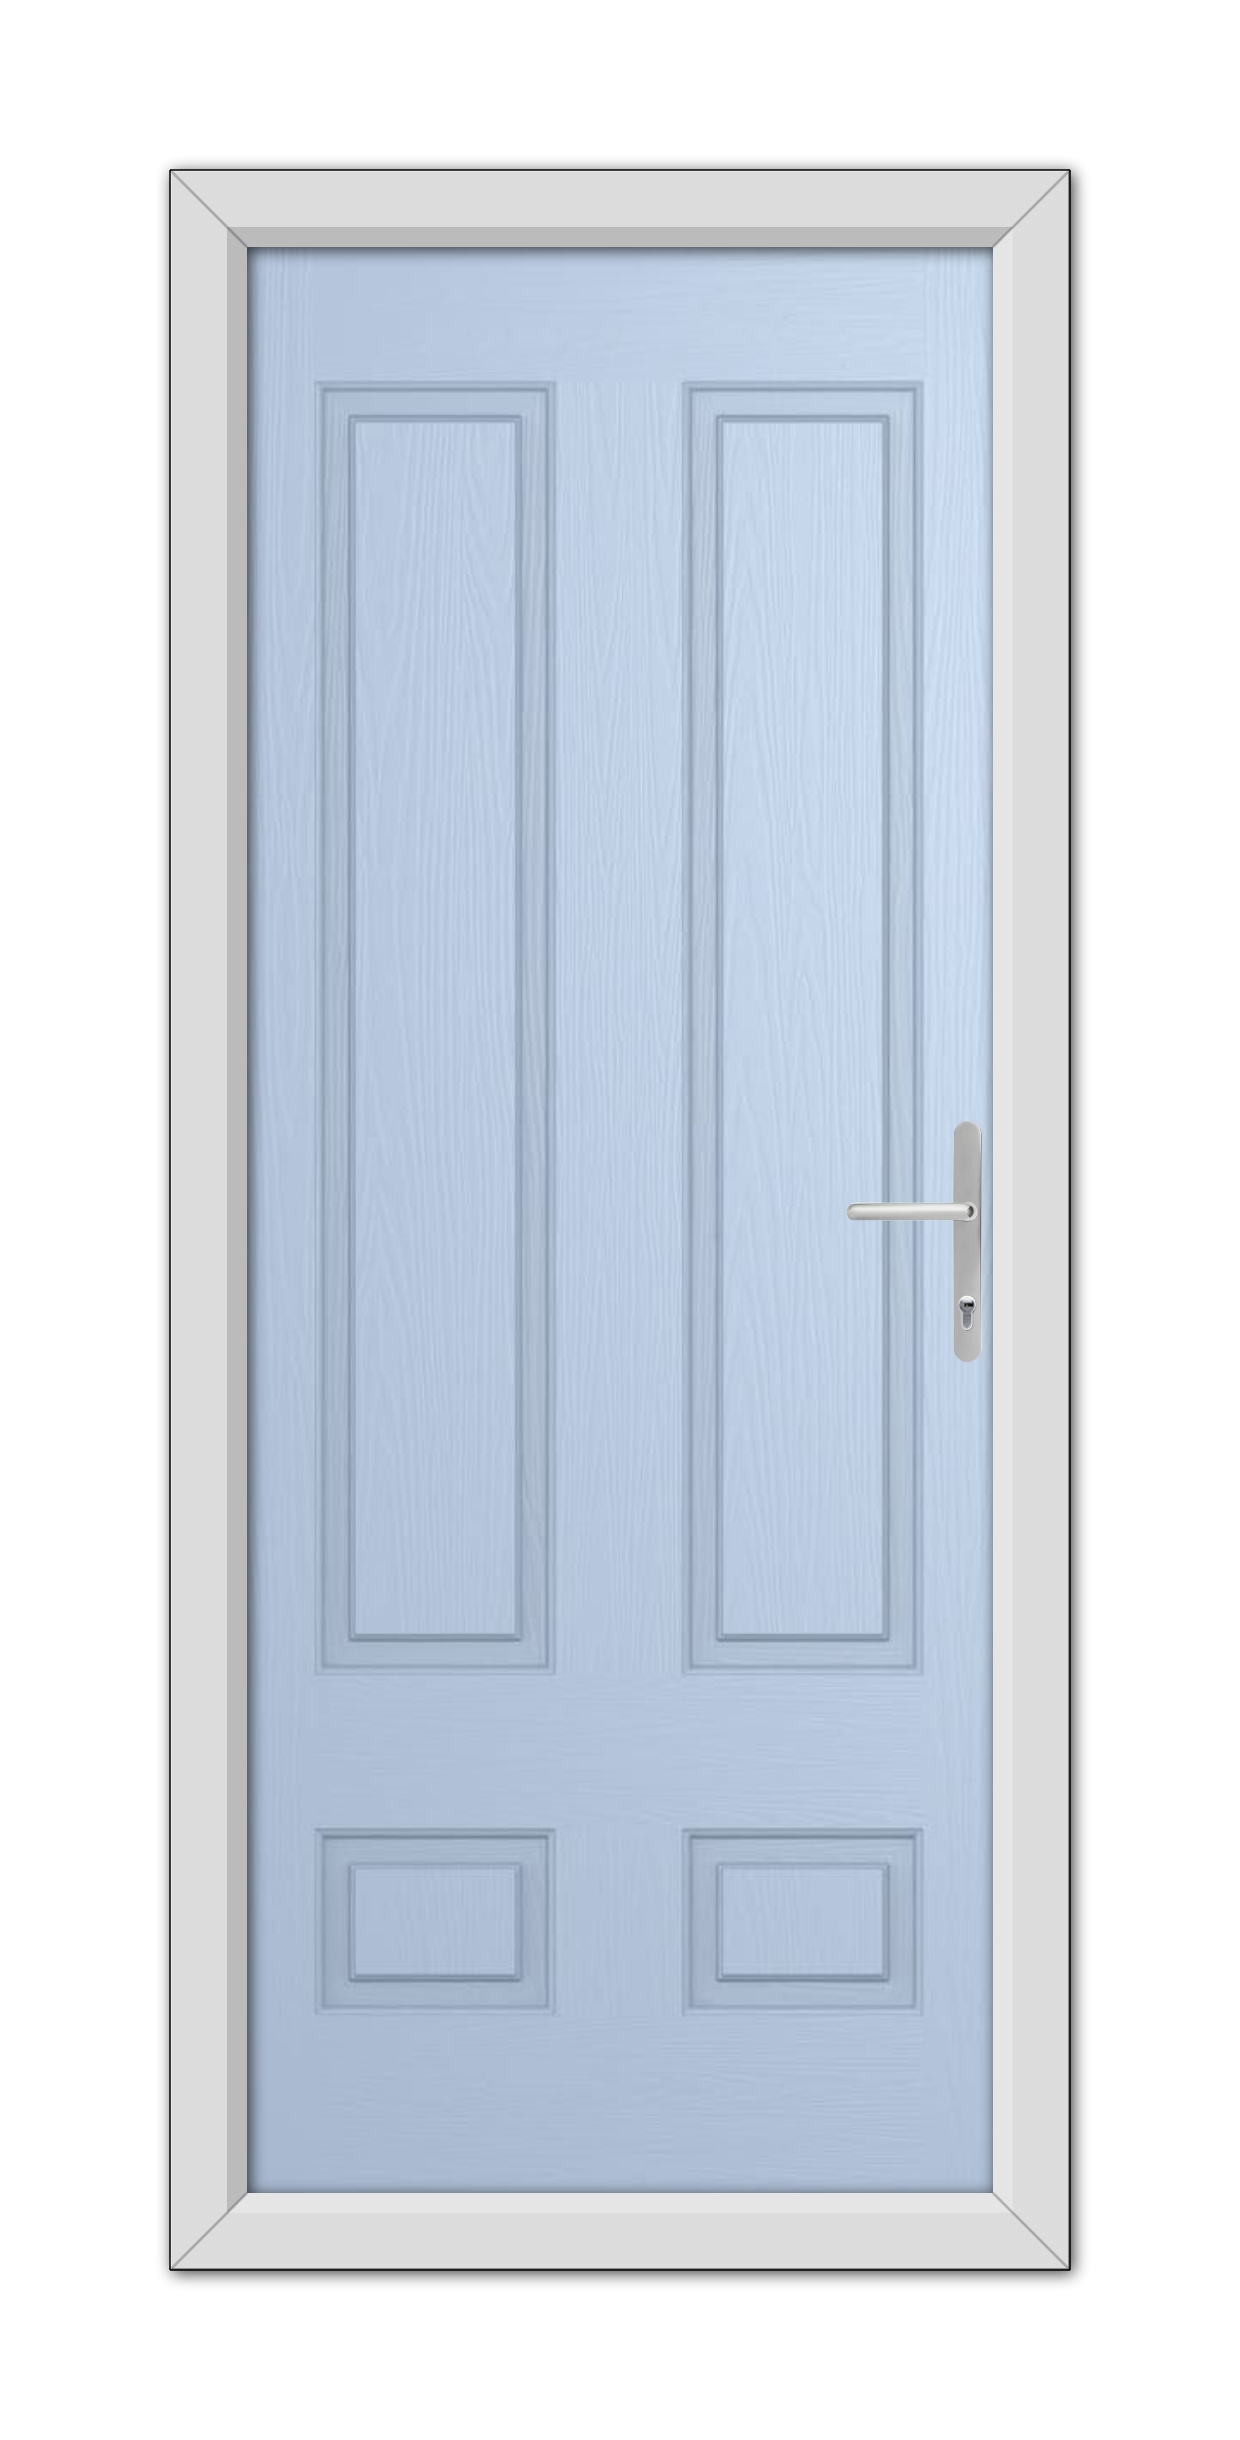 A closed Duck Egg Blue Aston Solid Composite Door 48mm Timber Core with a silver handle, set within a white frame.